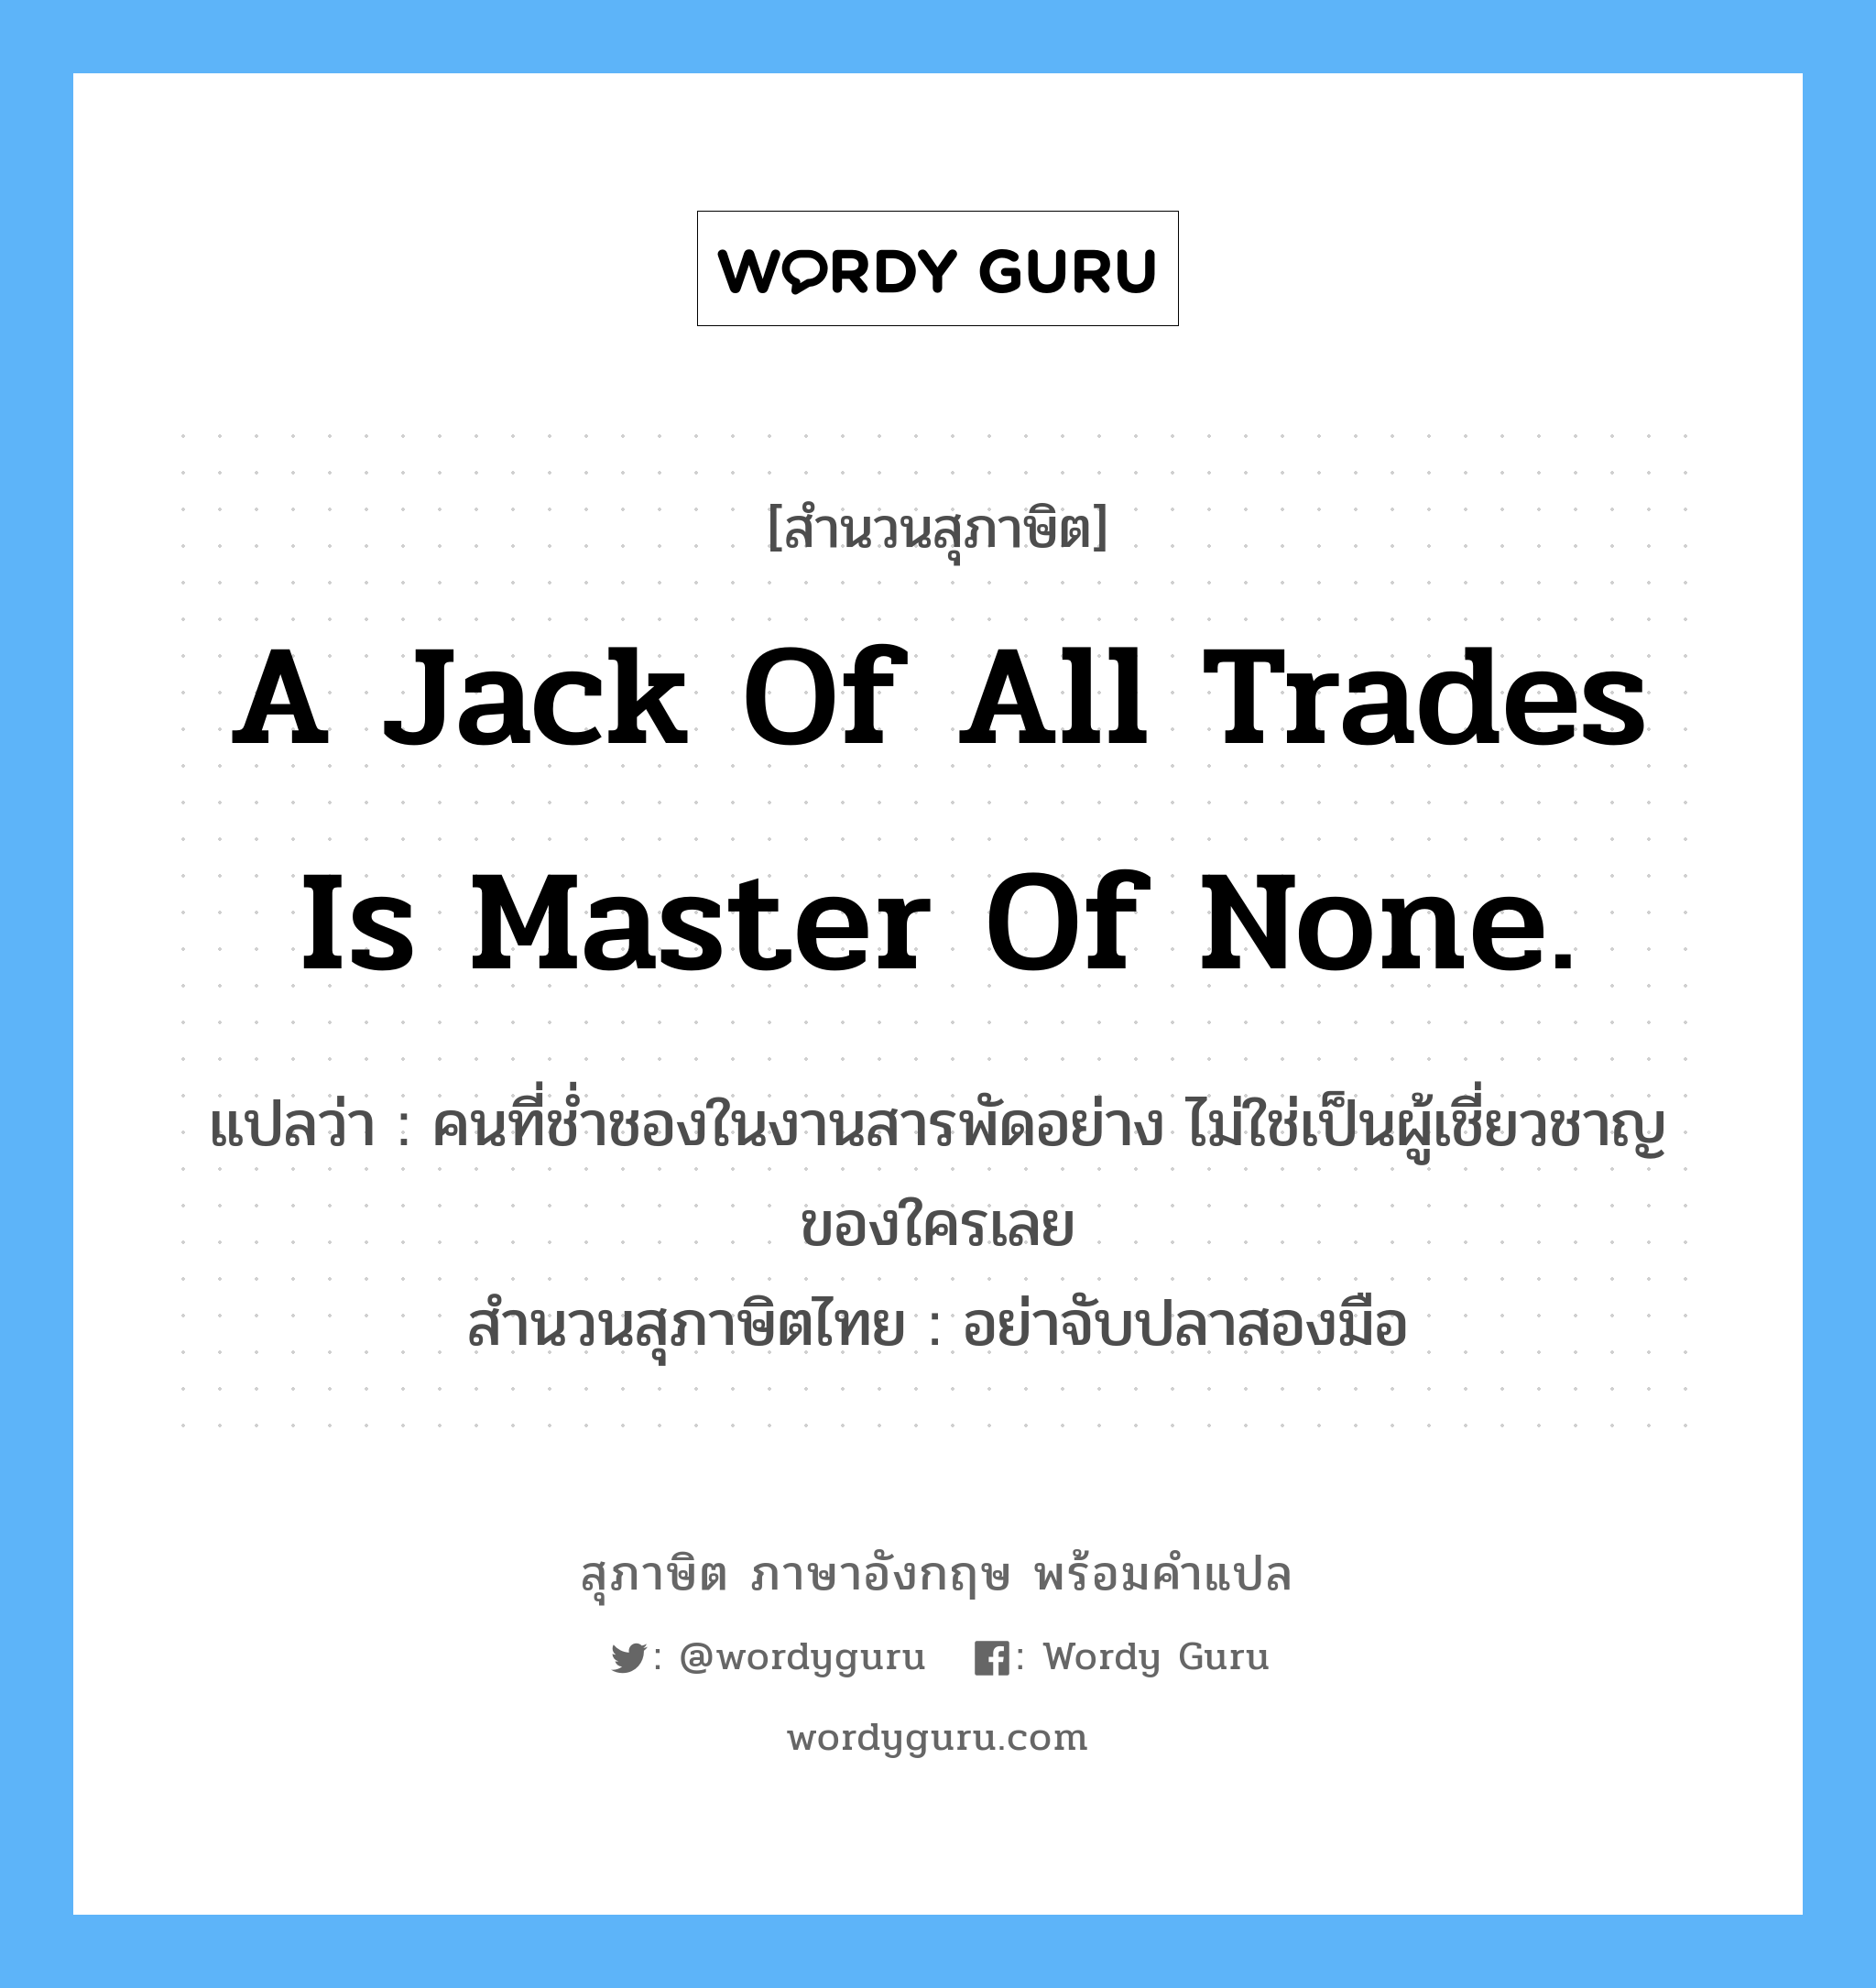 A jack of all trades is master of none.